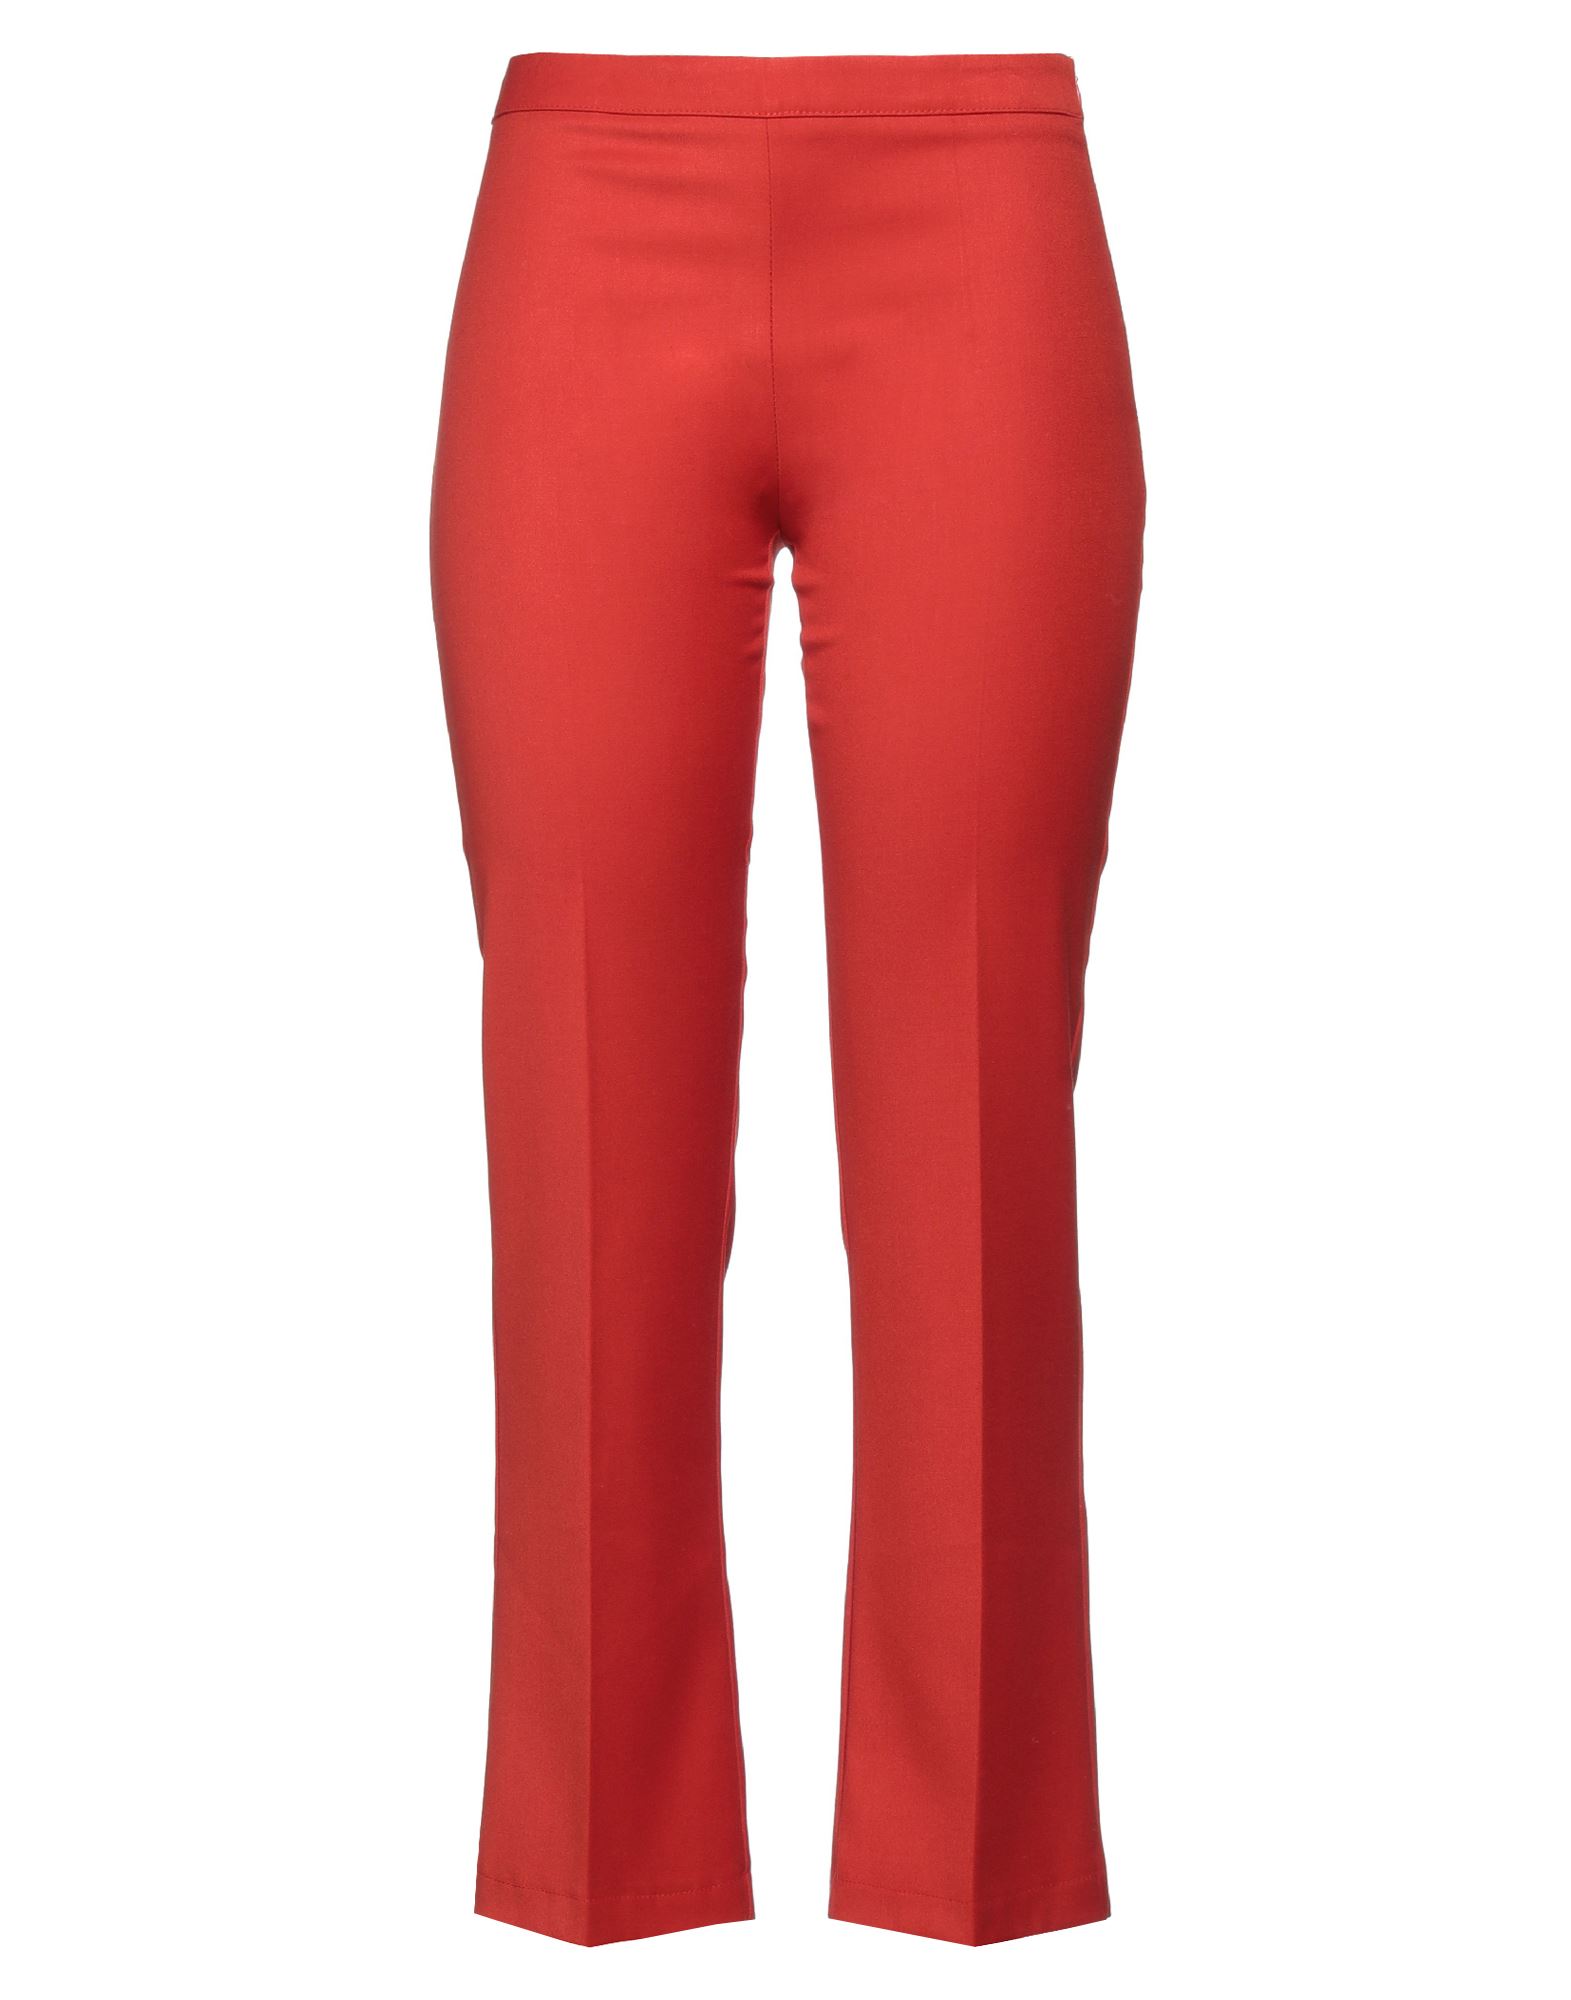 Operà Woman Pants Rust Size 4 Polyester, Viscose, Elastane In Red